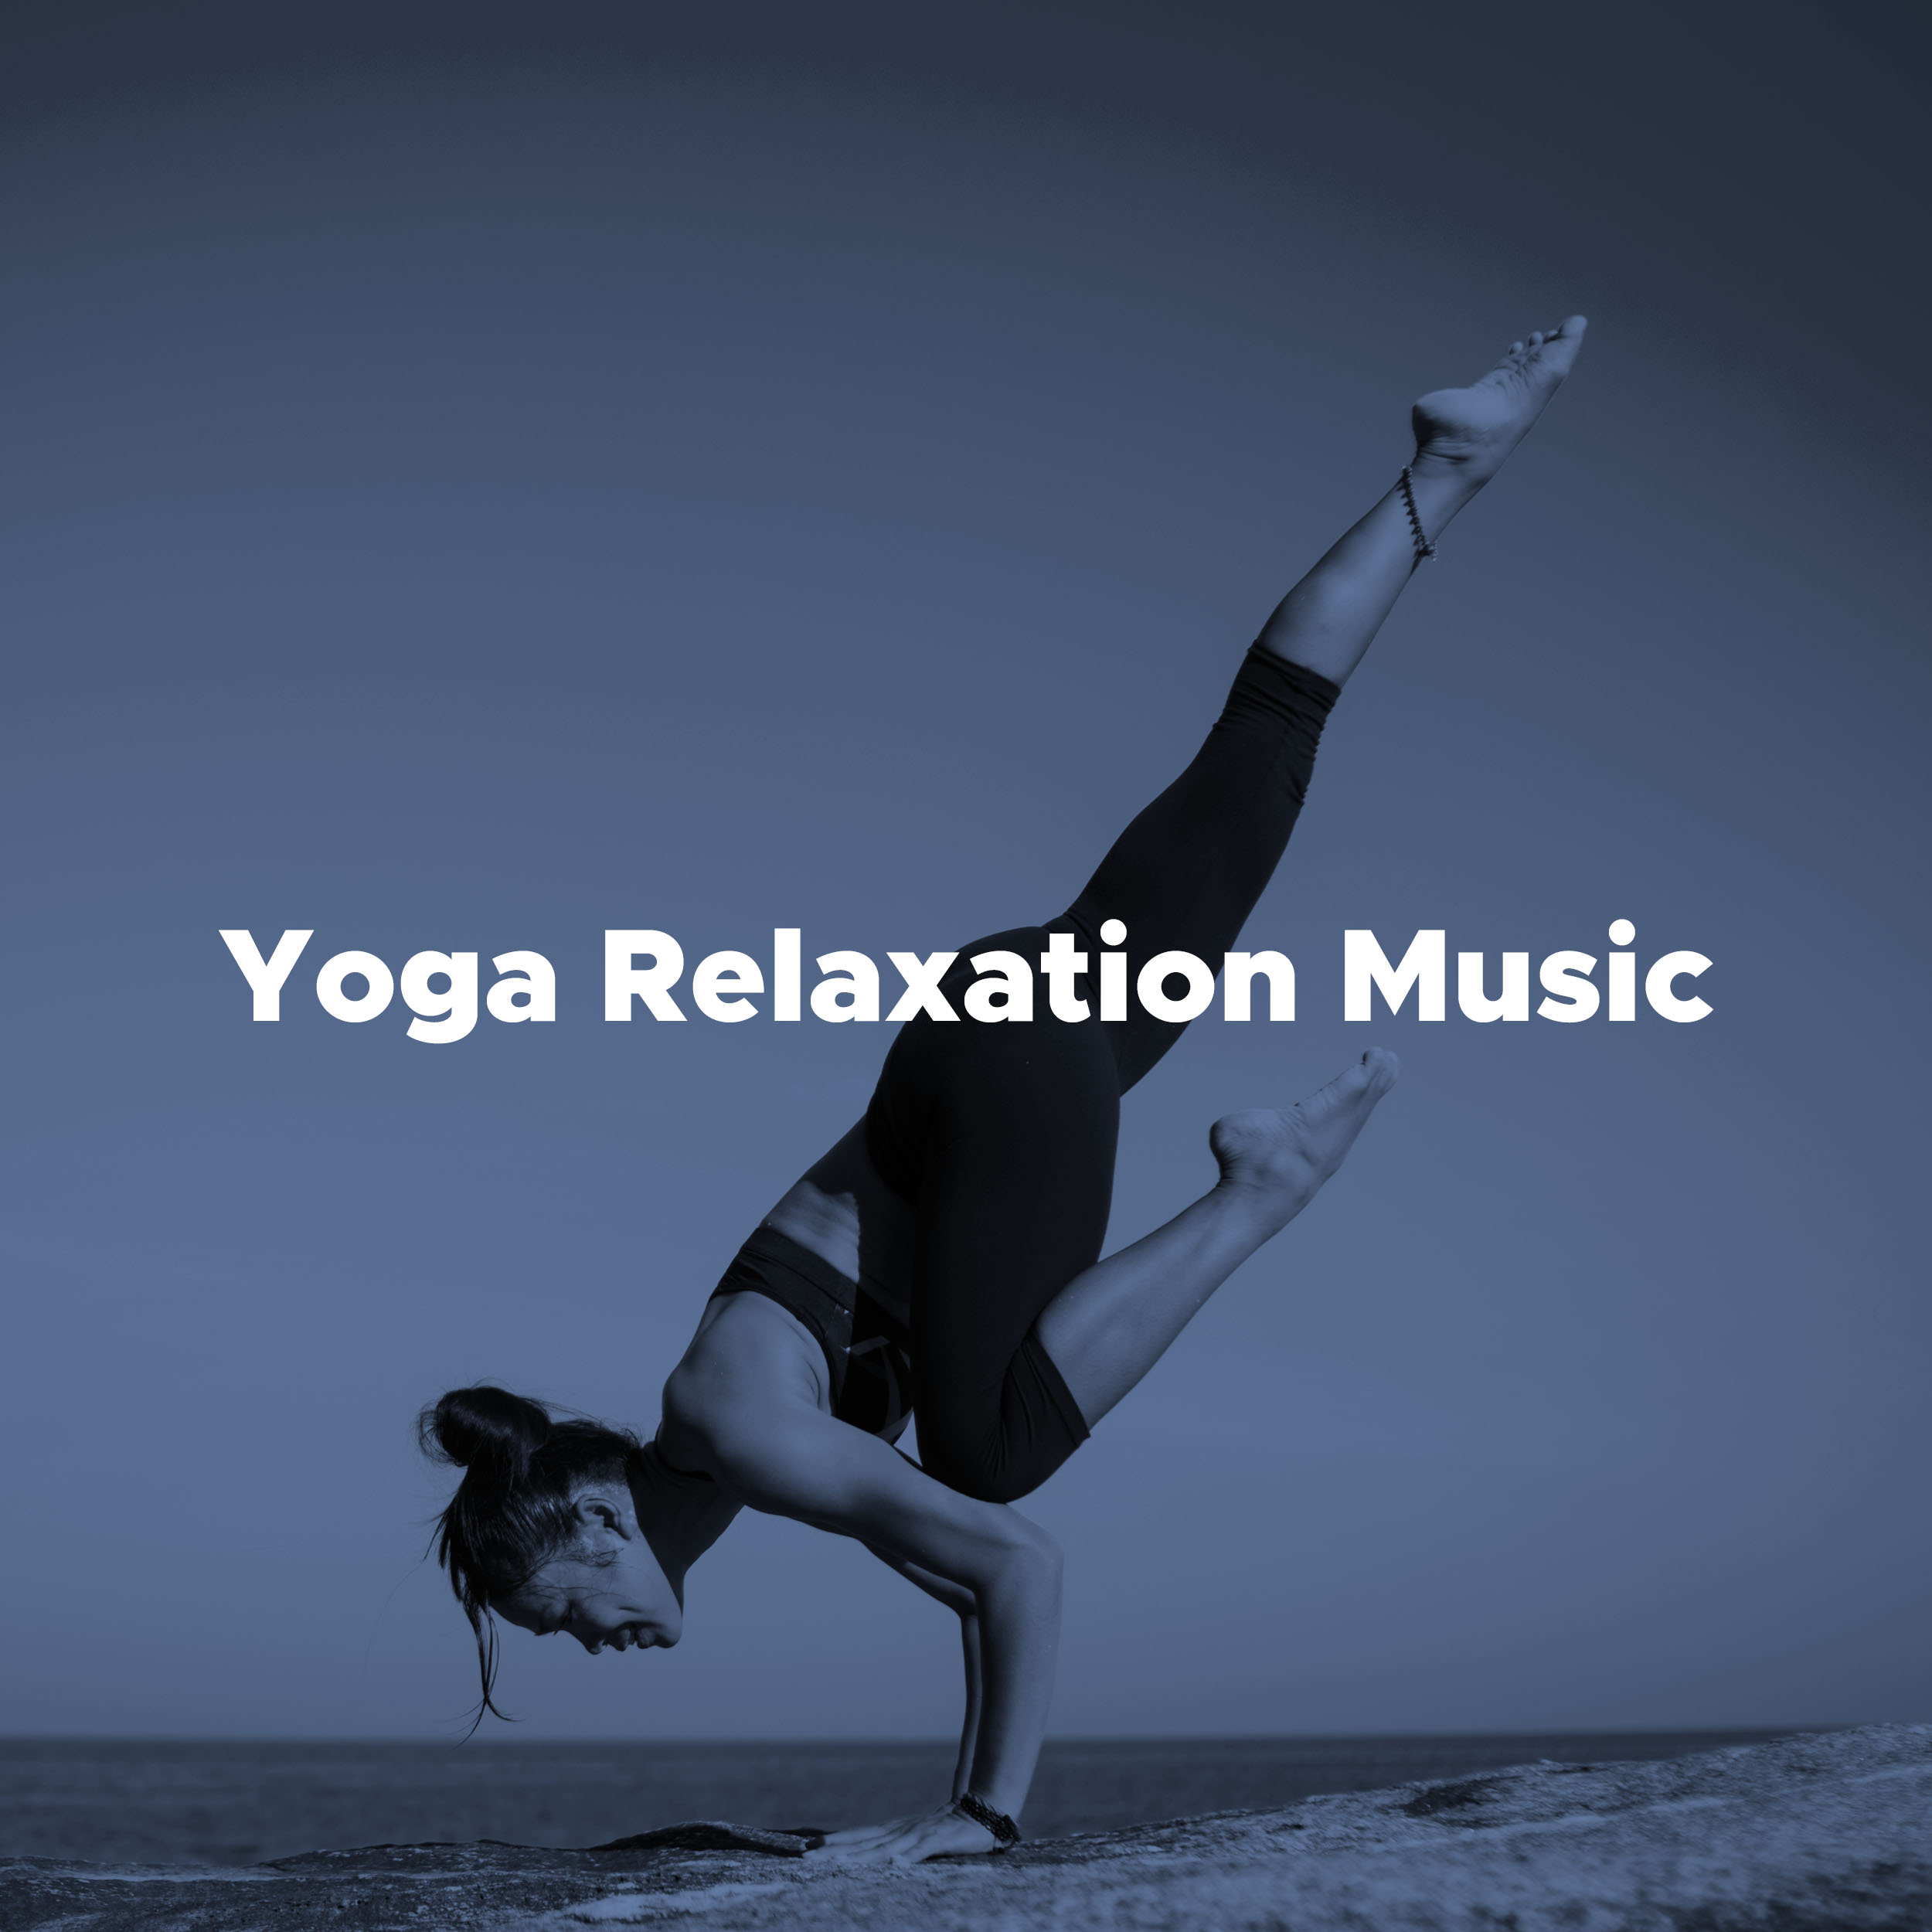 Yoga Relaxation Music: music for Meditation and Relaxation